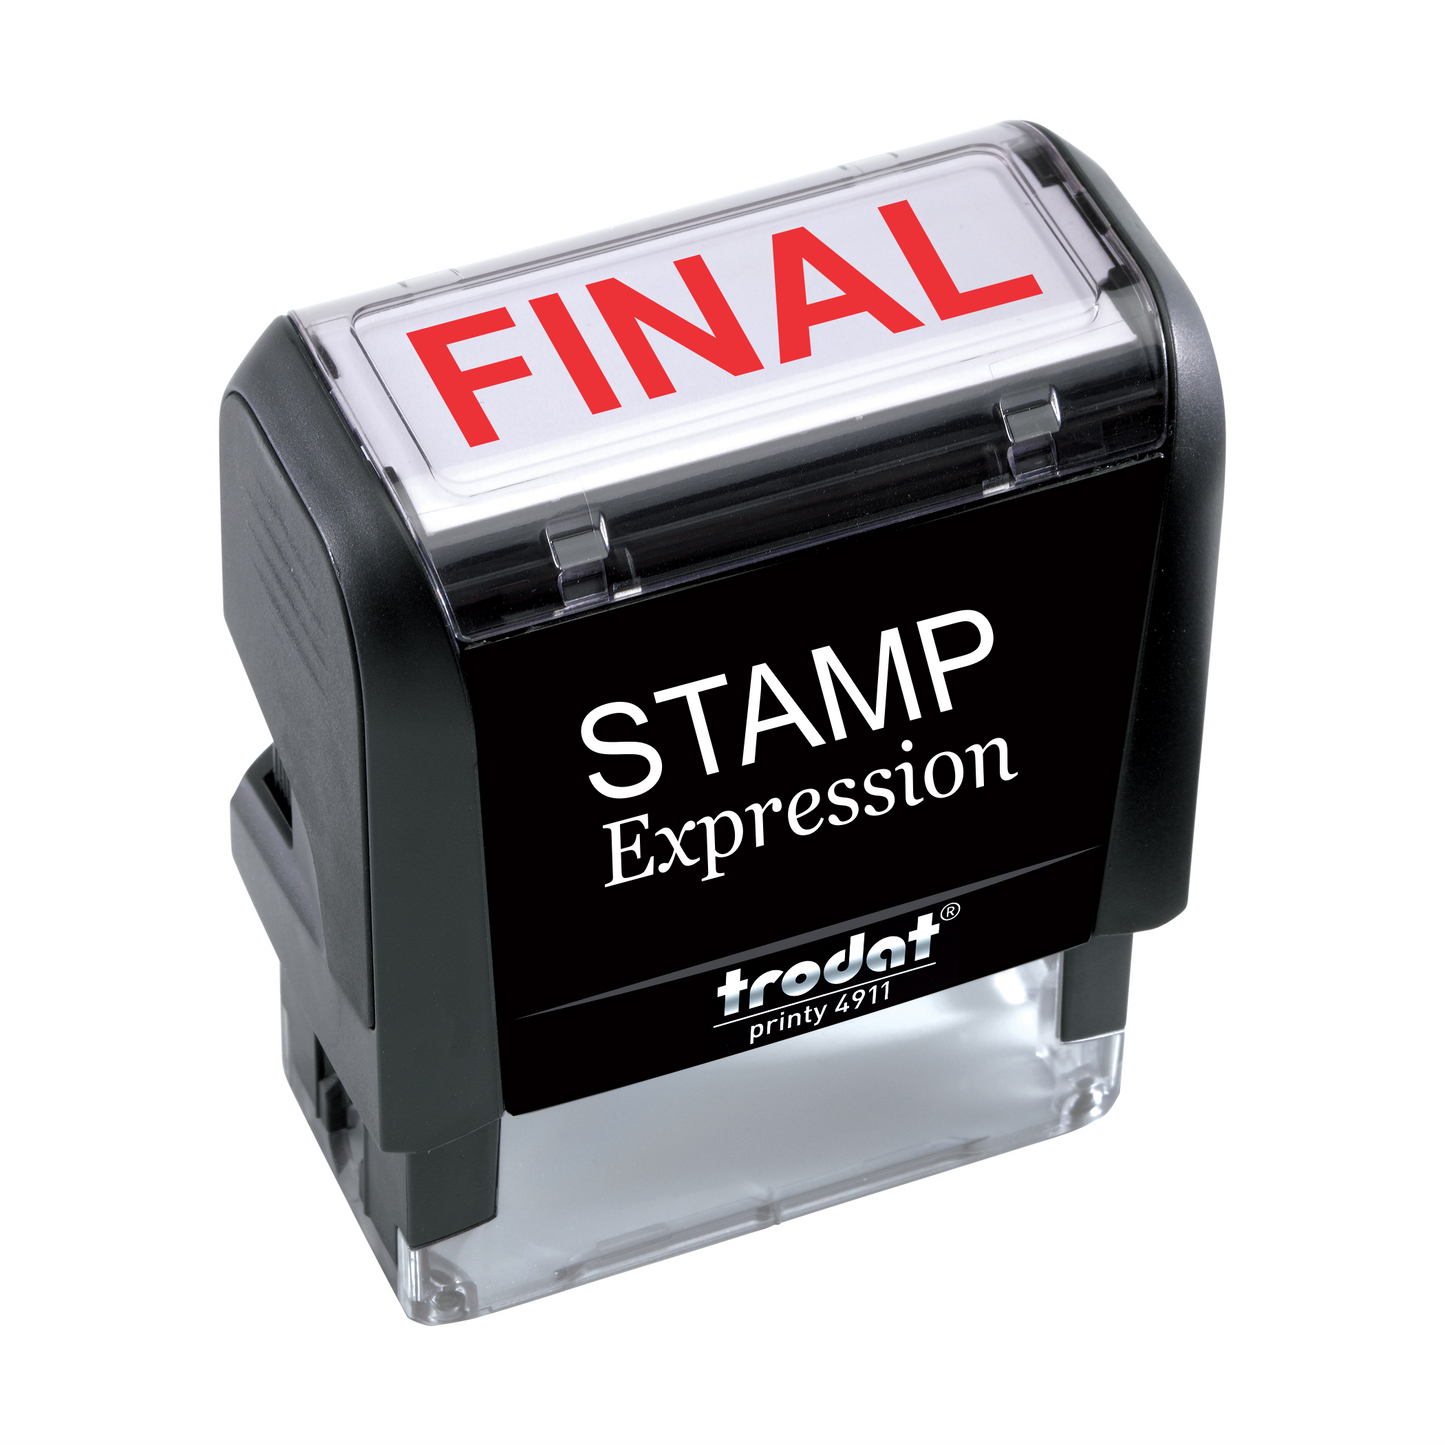 Final Office Self Inking Rubber Stamp (SH-5300)